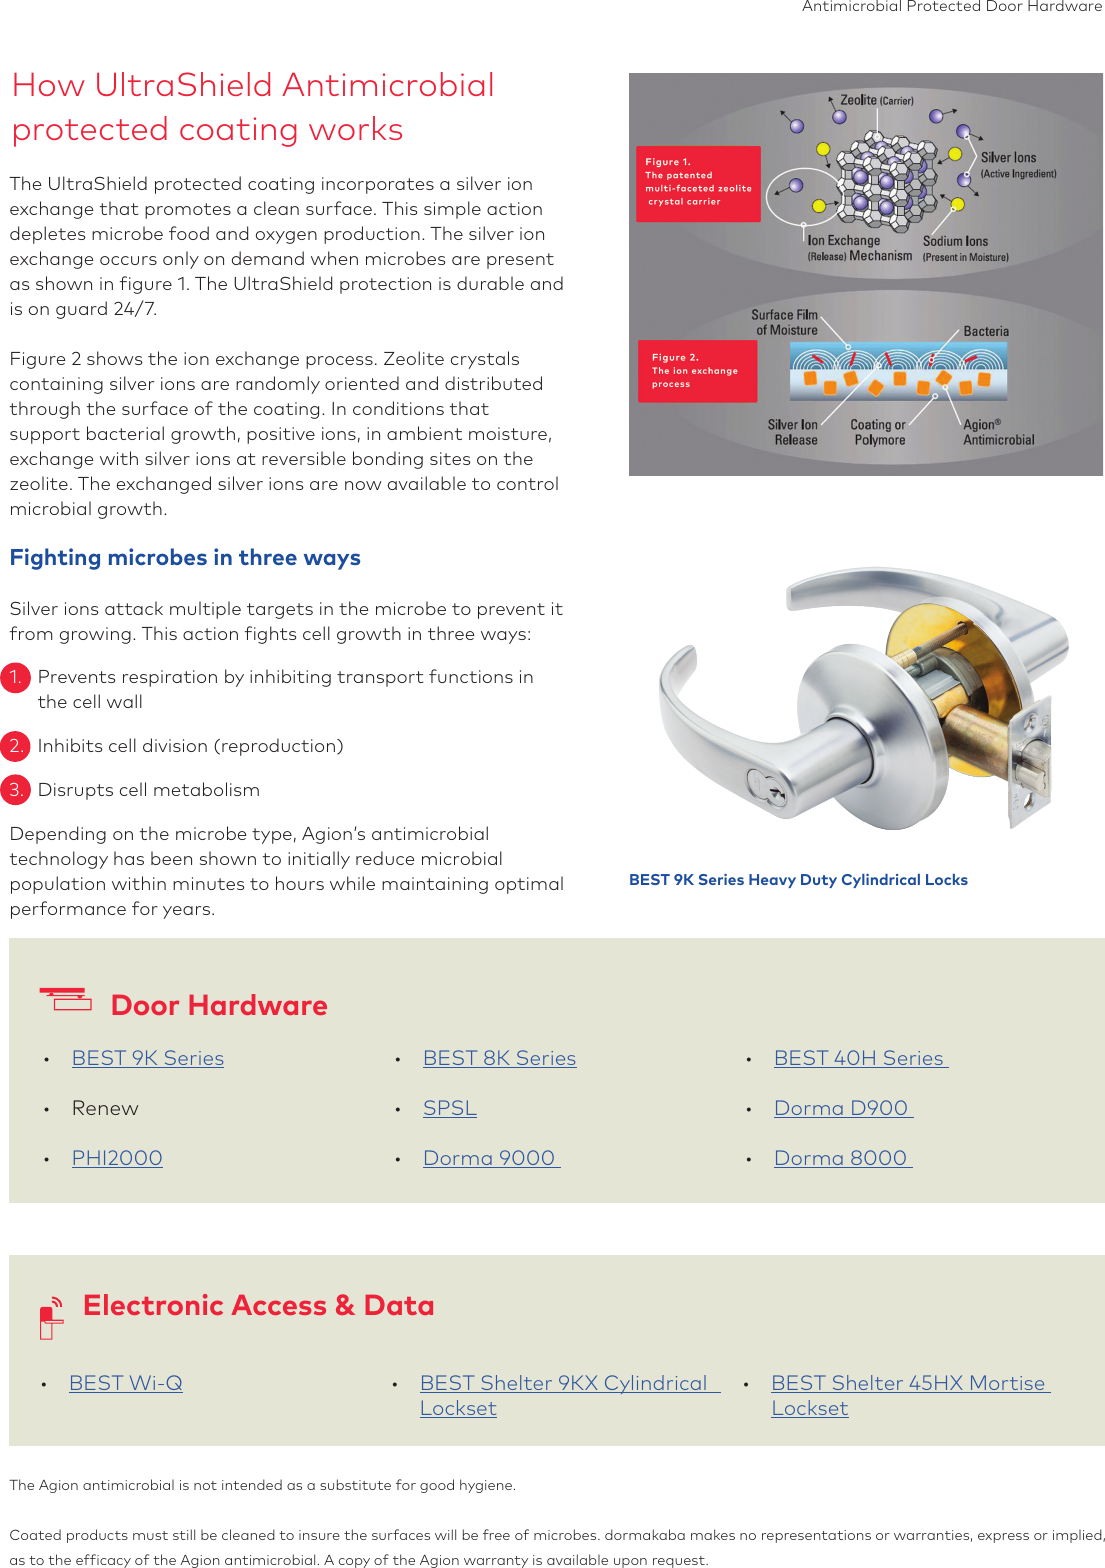 Page 3 of 4 - Dorma  Antimicrobial Protected Door Hardware Brochure Dormakaba-antimicrobial-protected-door-hardware-brochure